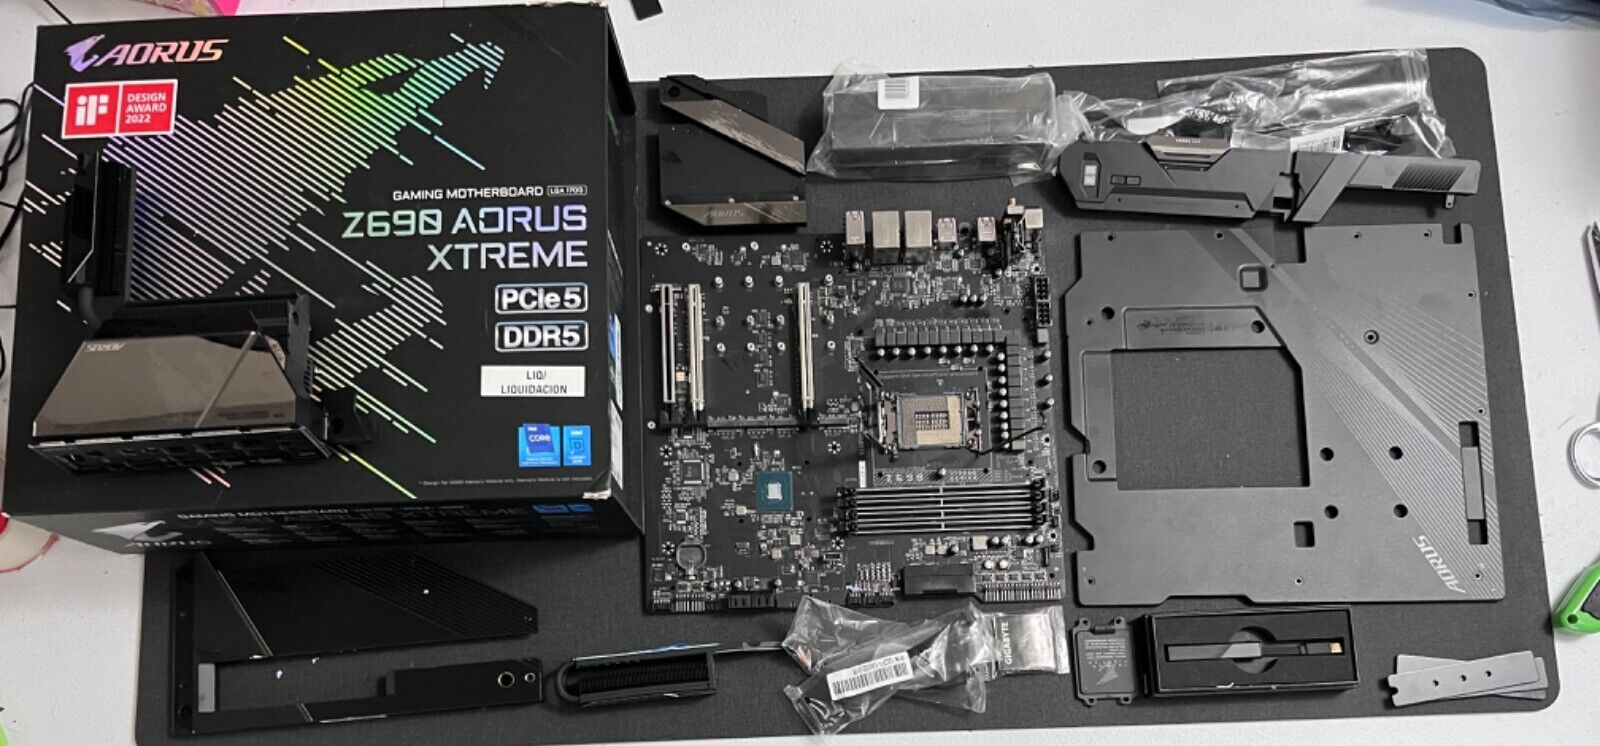 As-is Untested Gigabyte Z690 Aorus Xtreme Intel LGA 1700 EATX DDR5 Motherboard